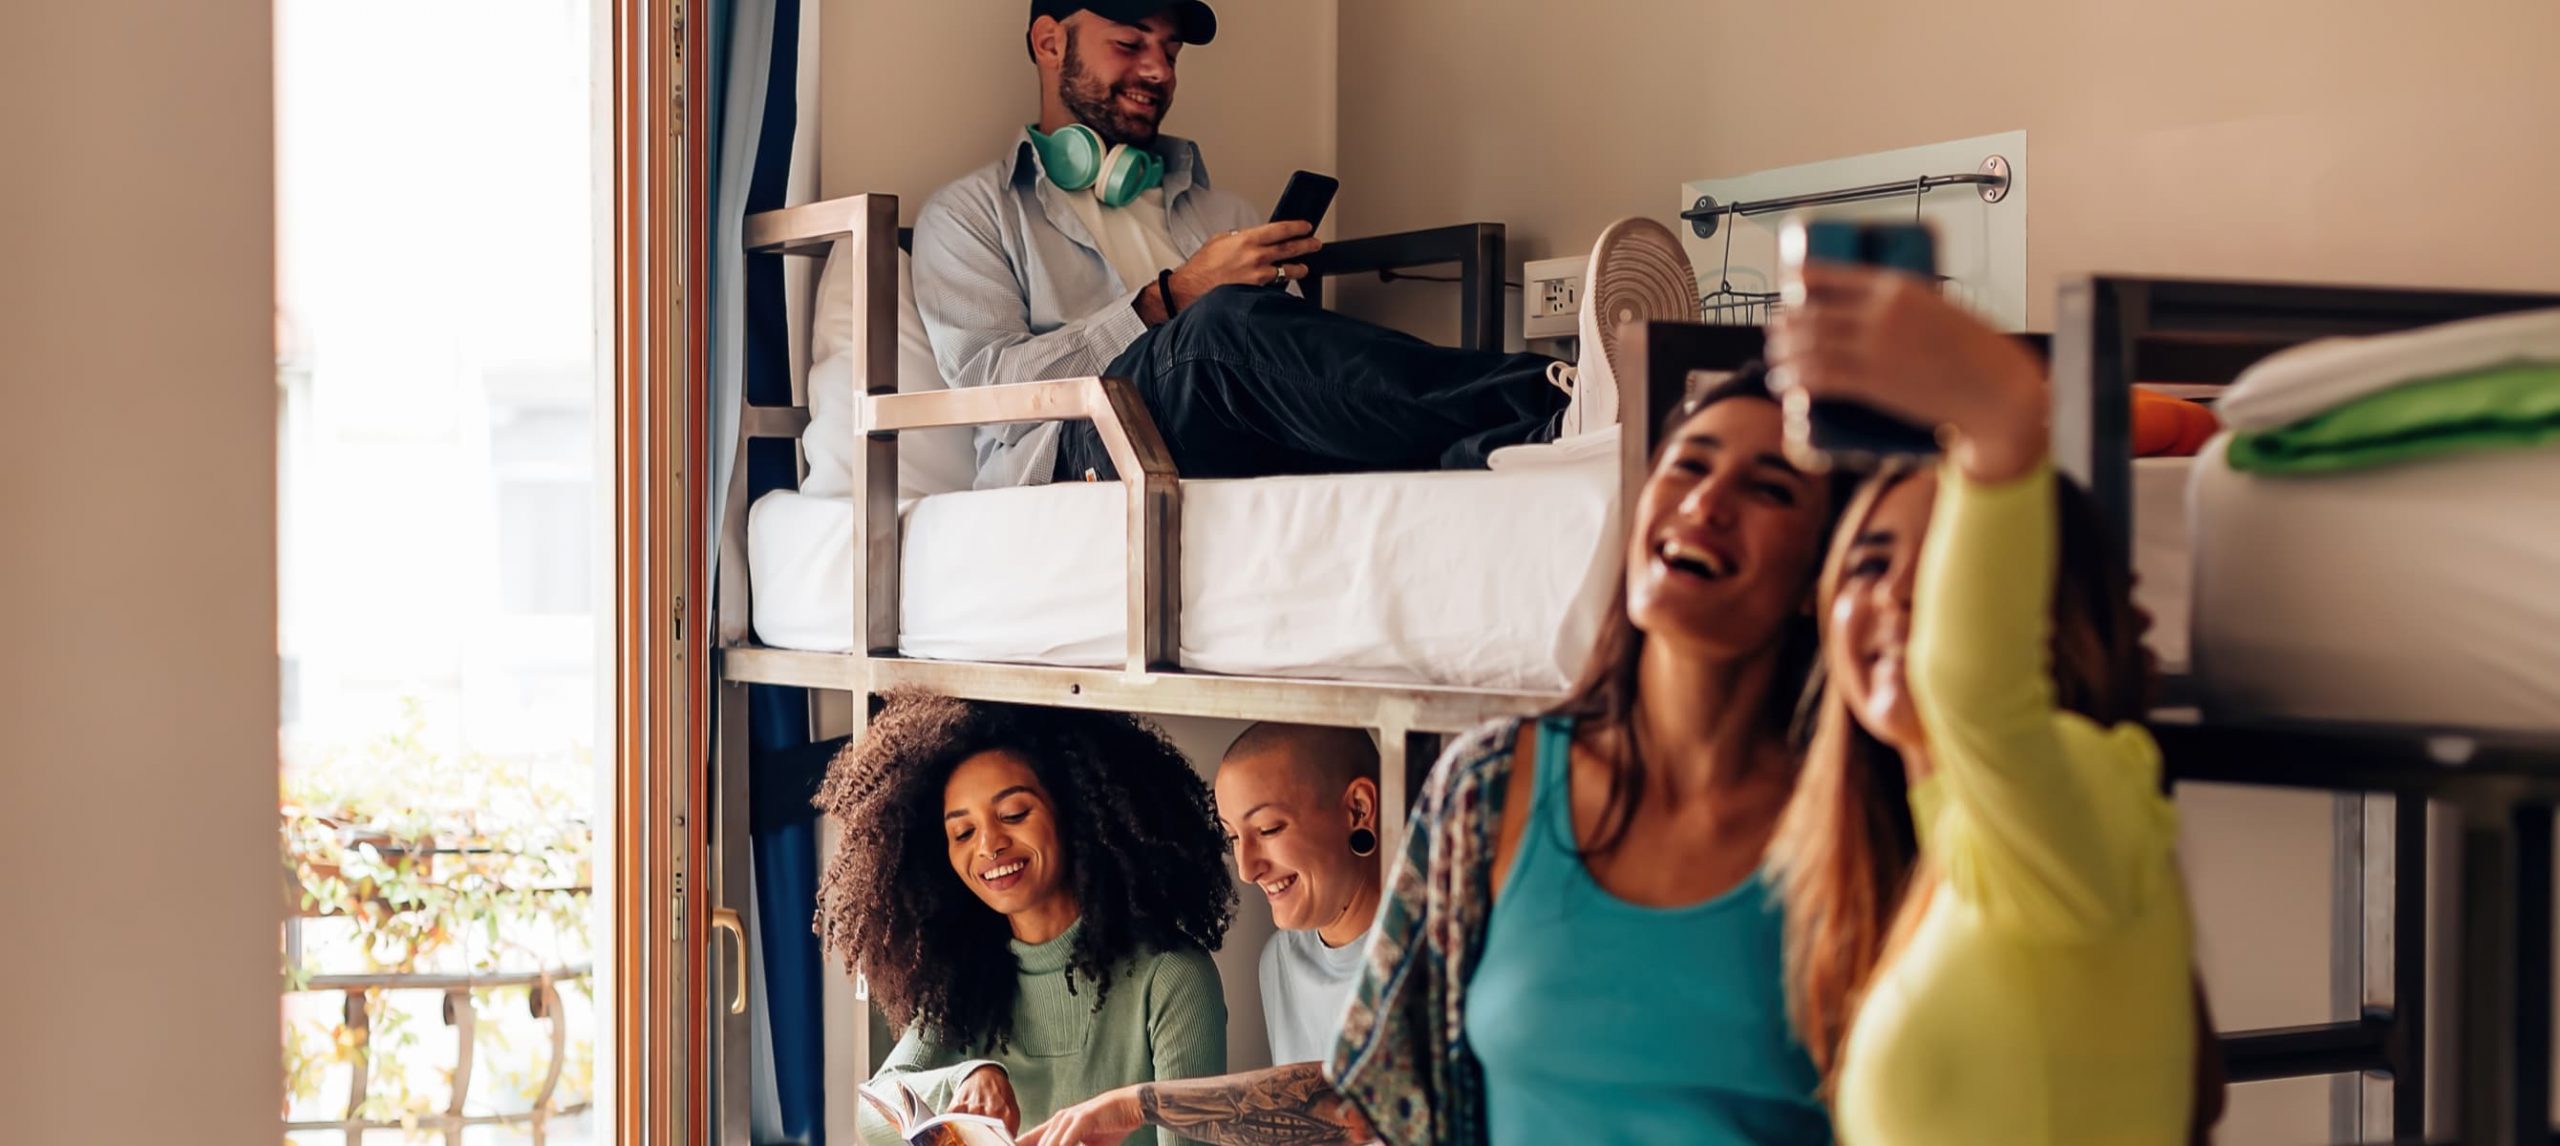 Young travelers happily chatting in a hostel bedroom.